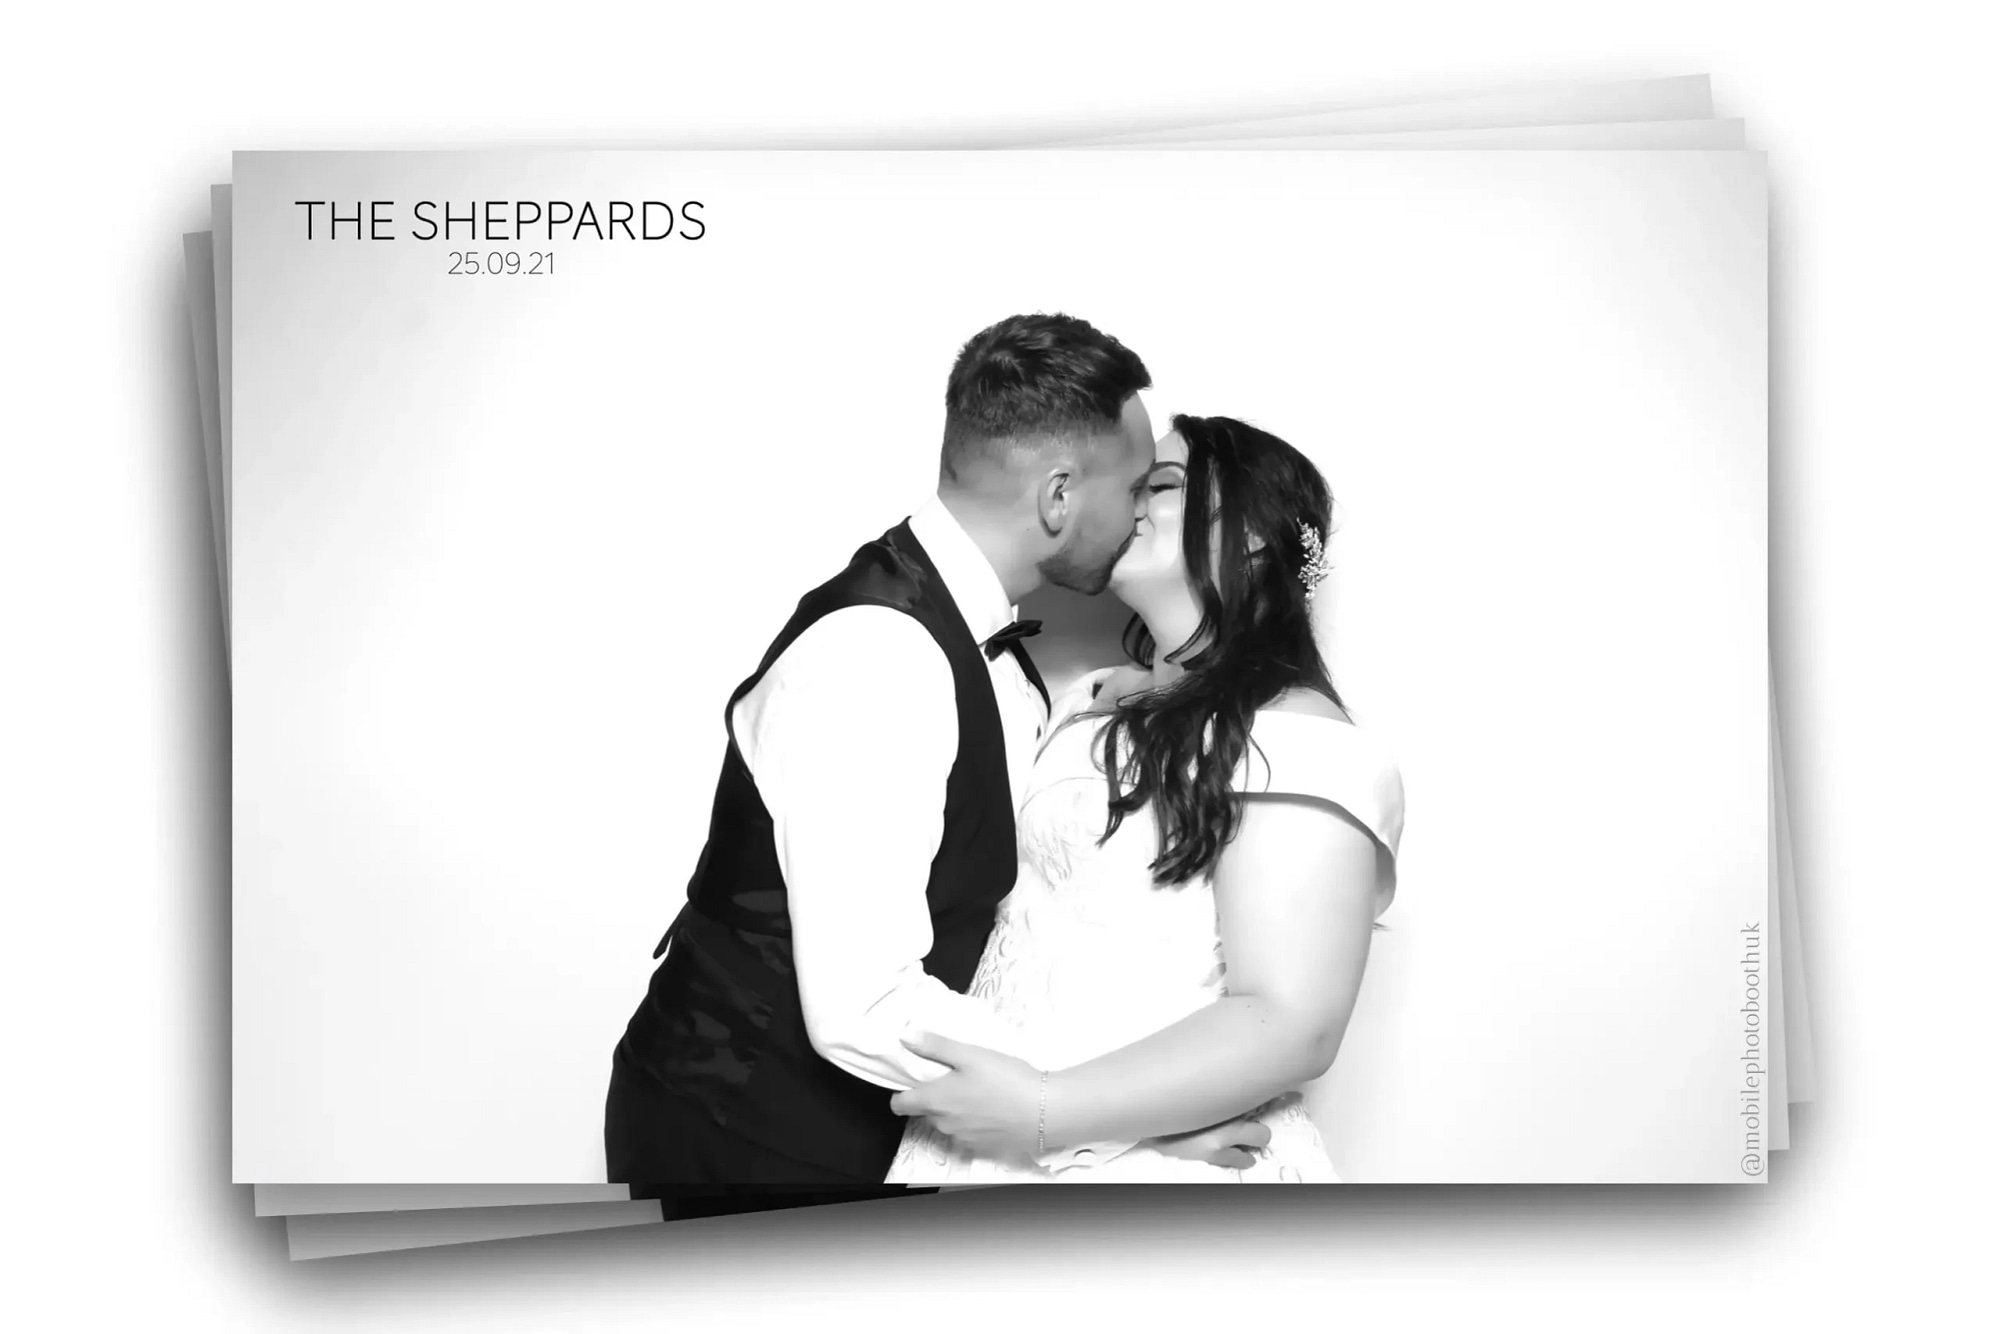 Bride and groom's print in the black and white Photo Booth This style has been made famous by the likes of The Kardashians